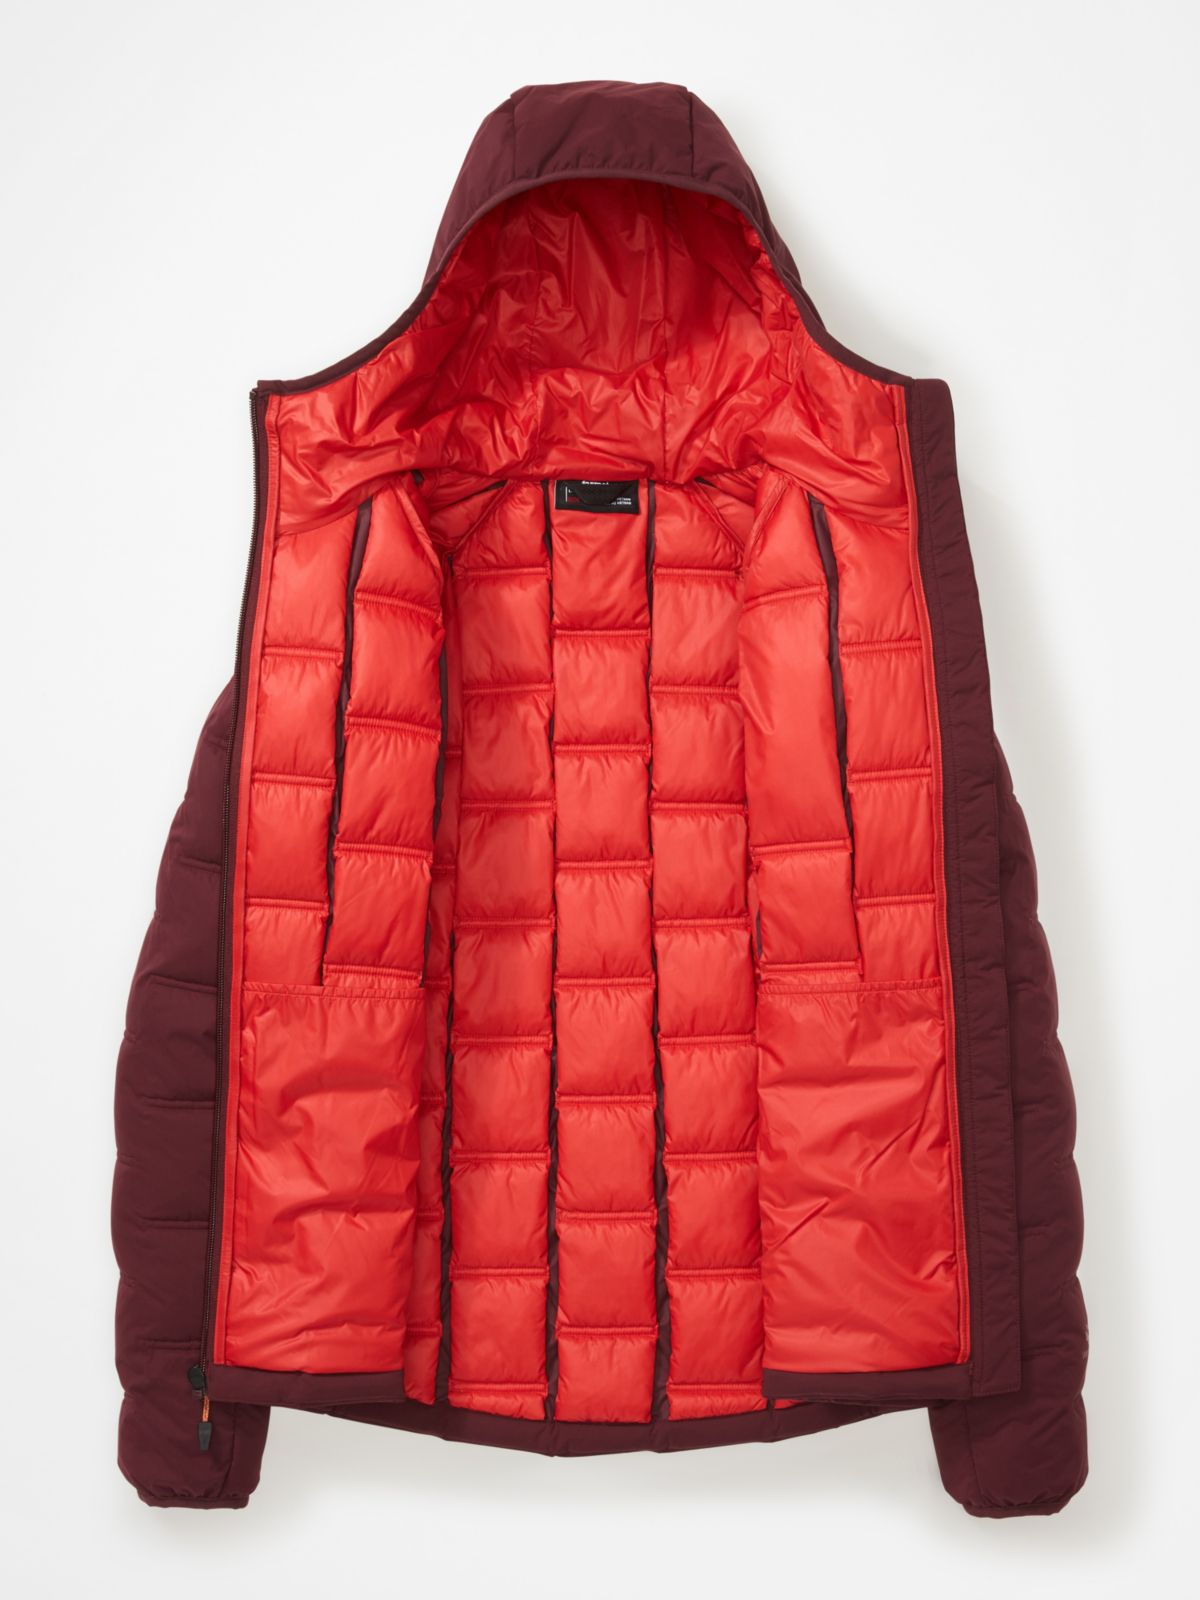 Open hooded jacket with lined interior